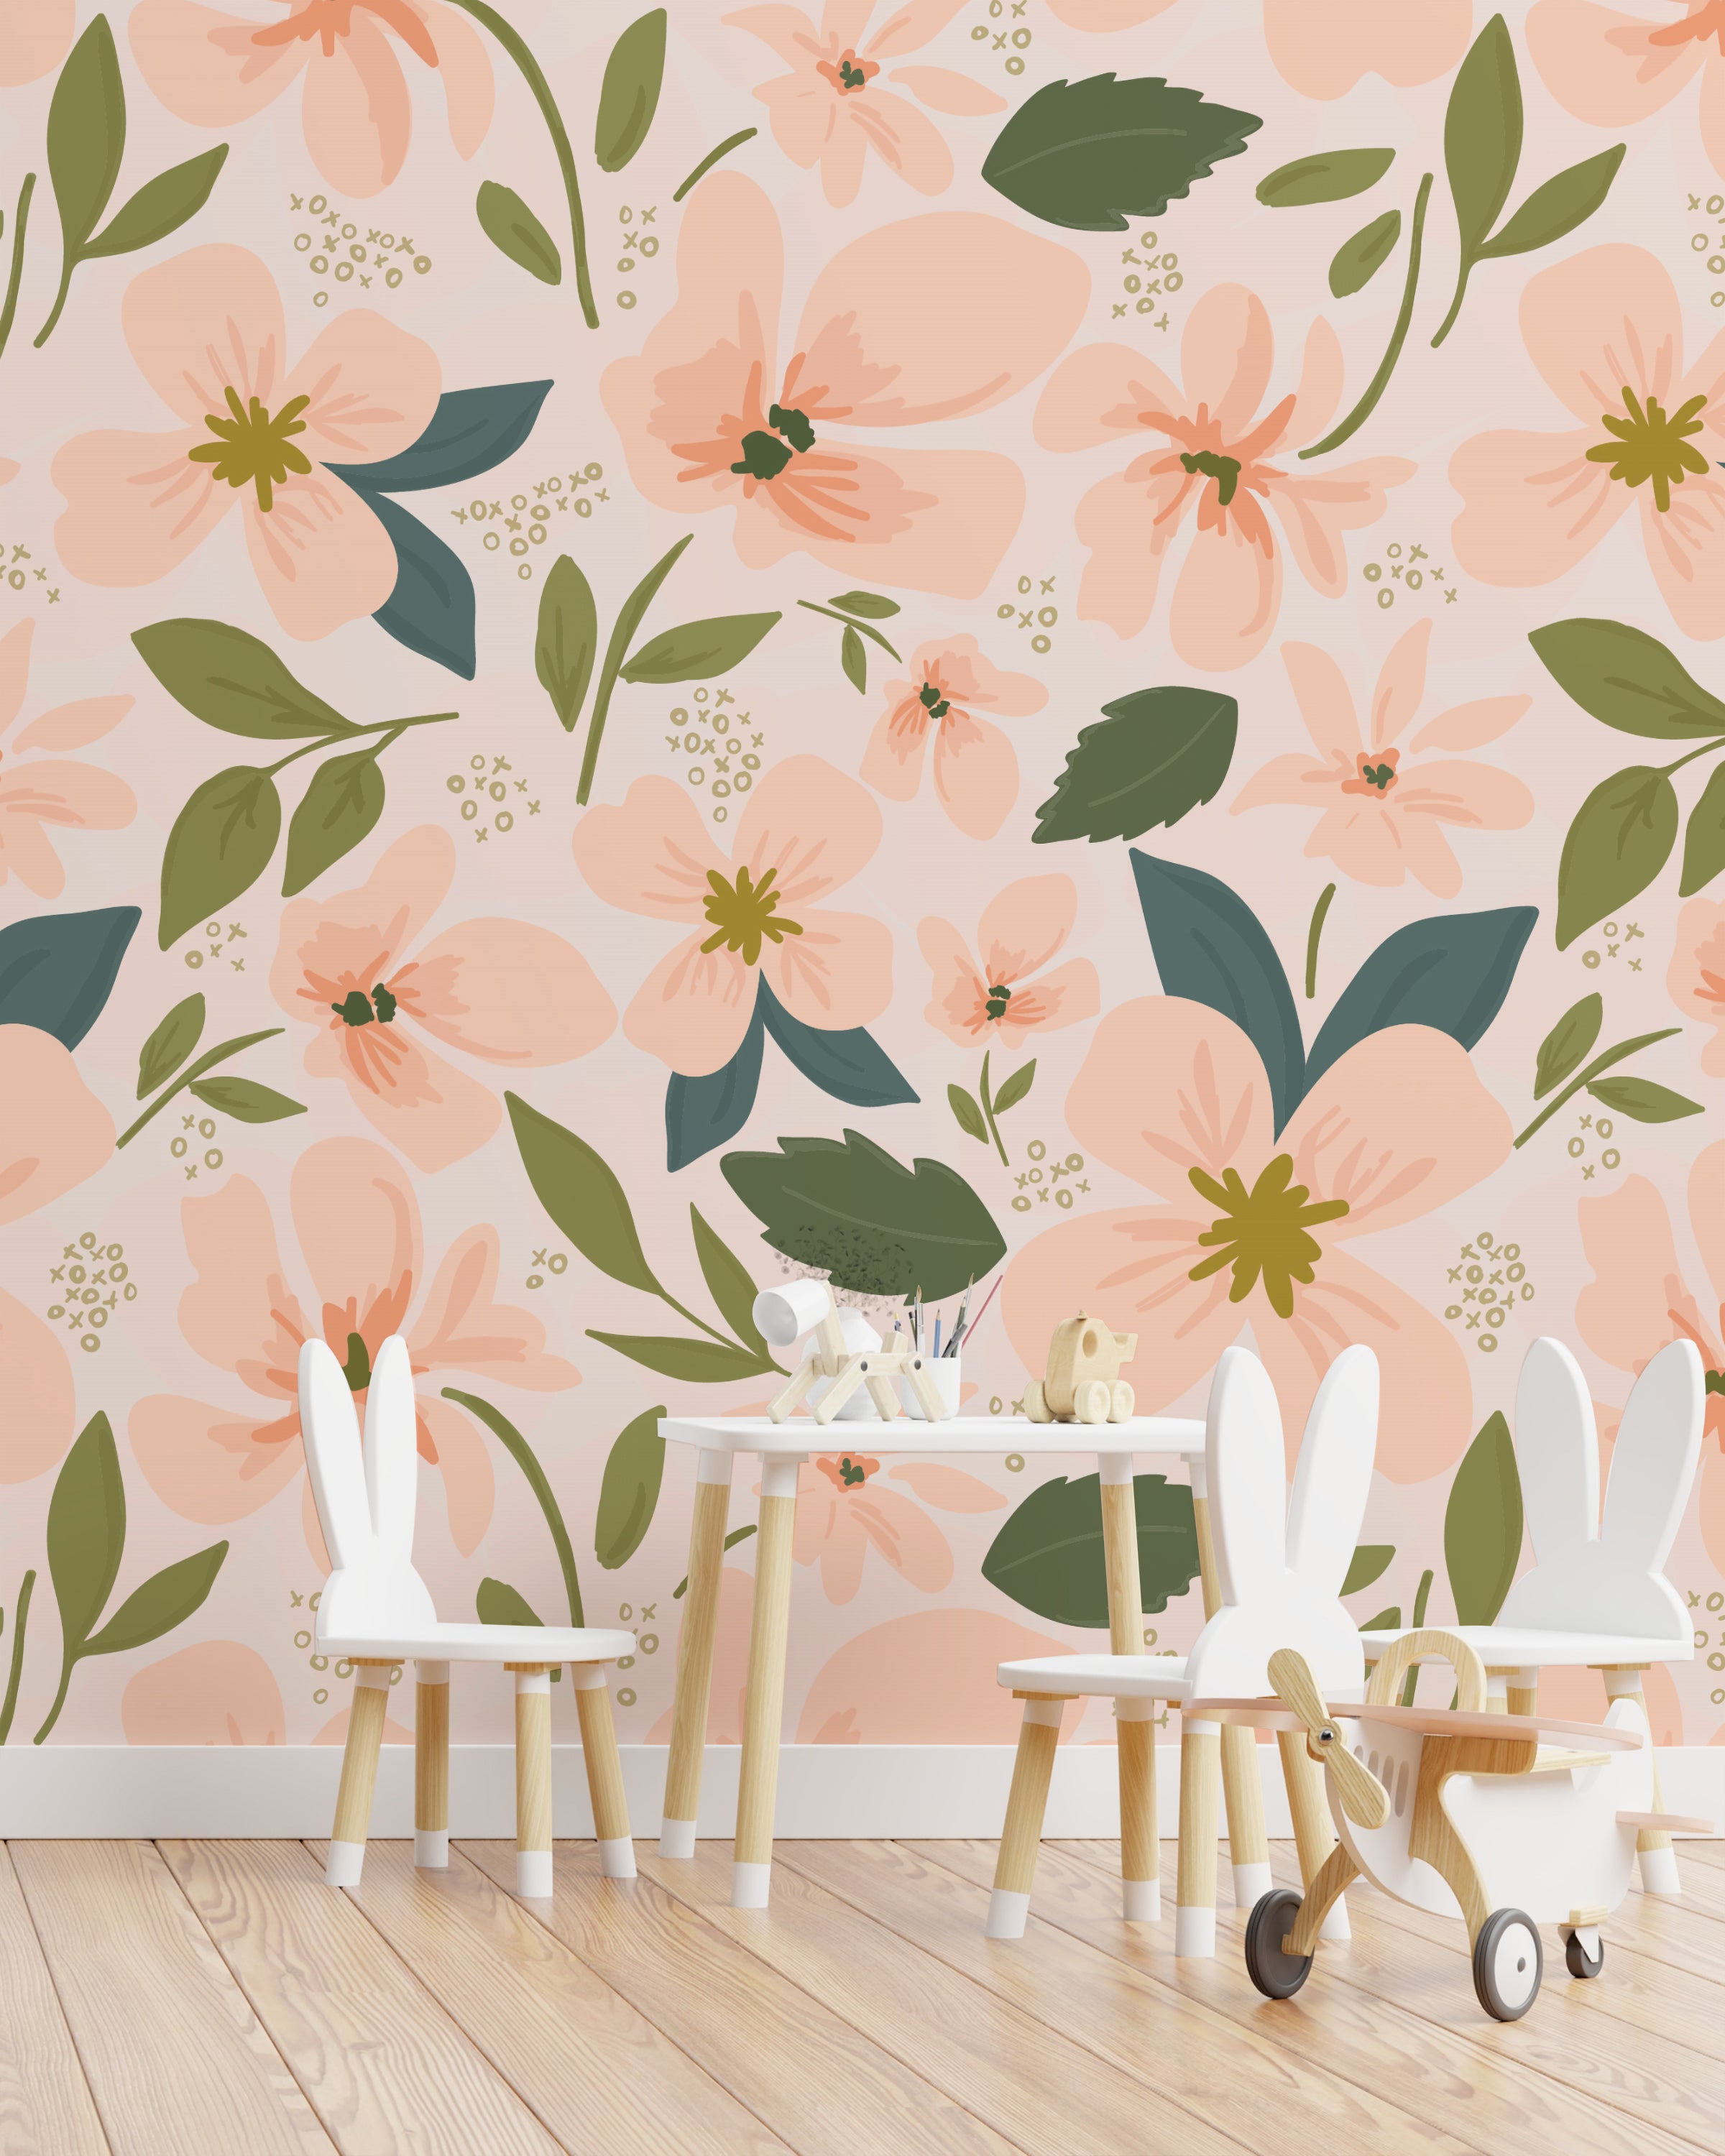 Children's play area with small white chairs and toys in front of a wall covered in soft peach floral wallpaper